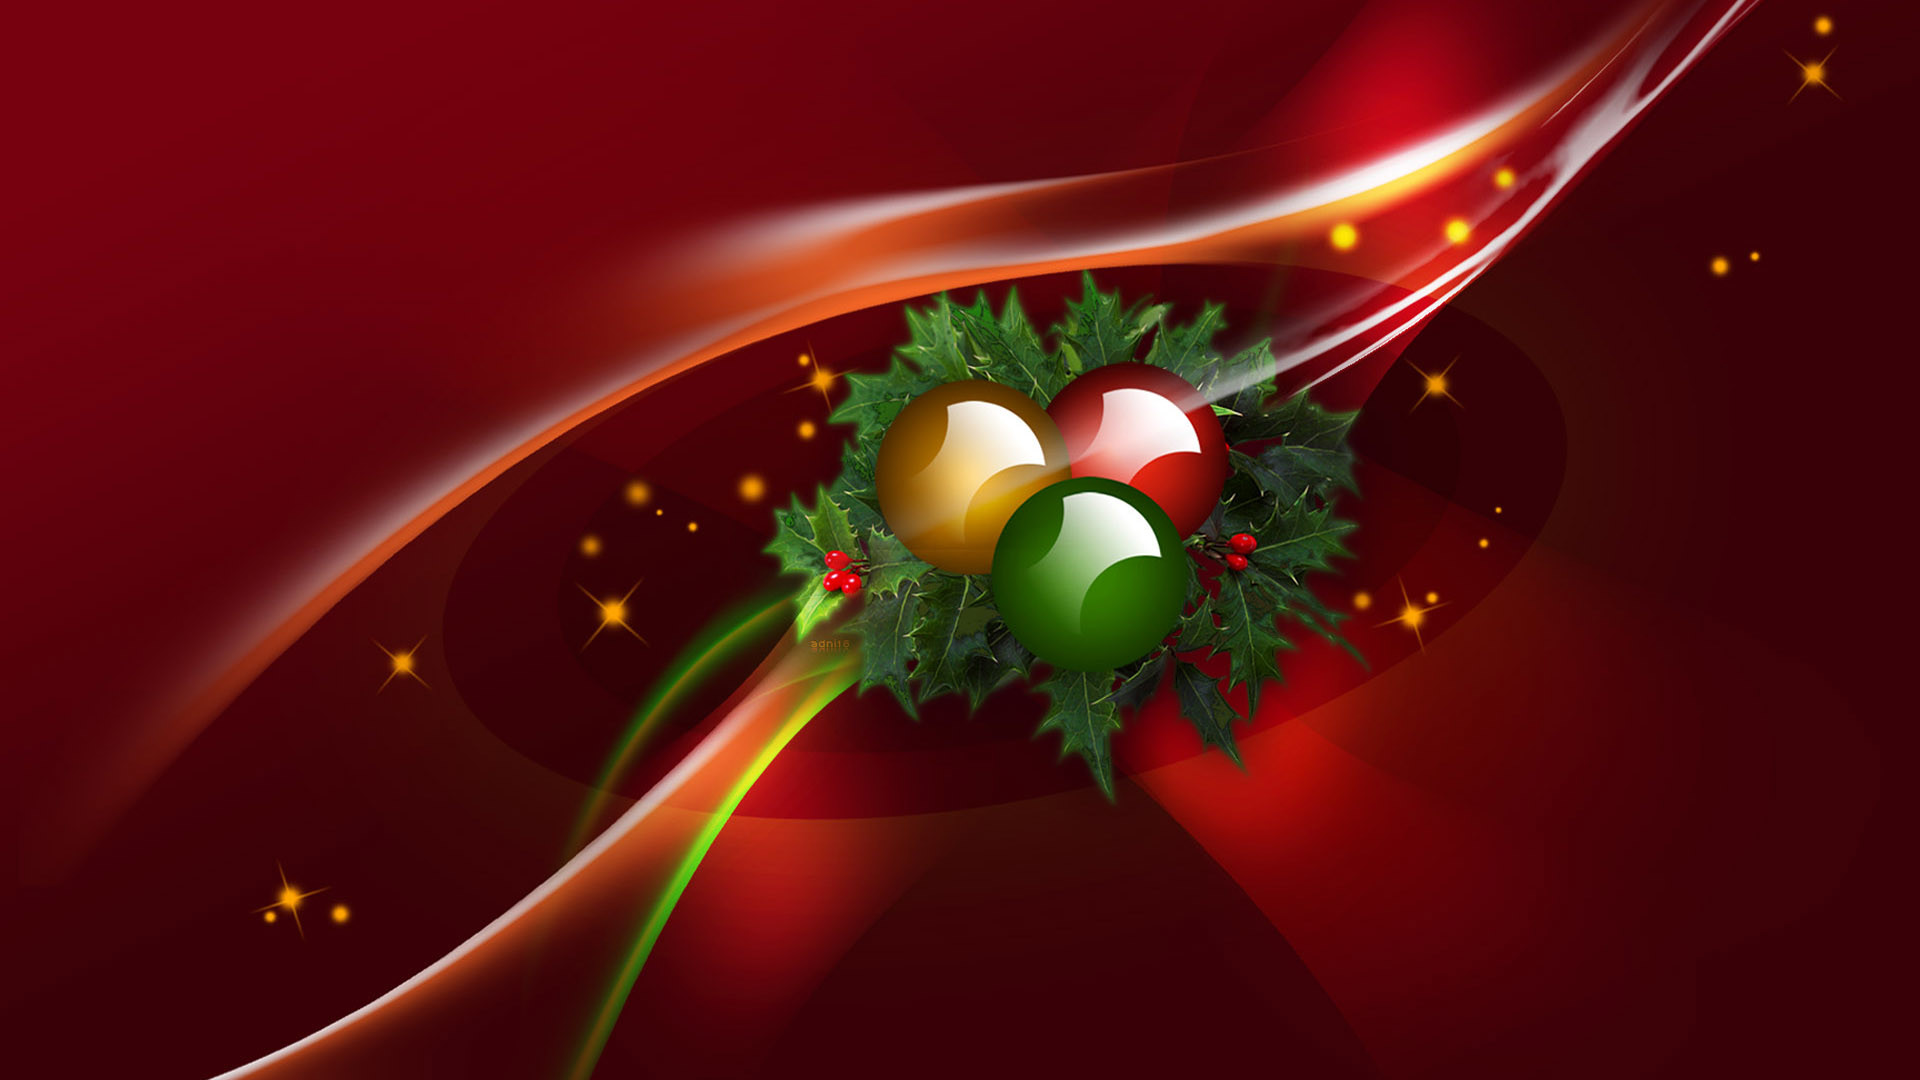 1920x1080 Christmas Backgrounds for Smart Phone and PC Desktop.